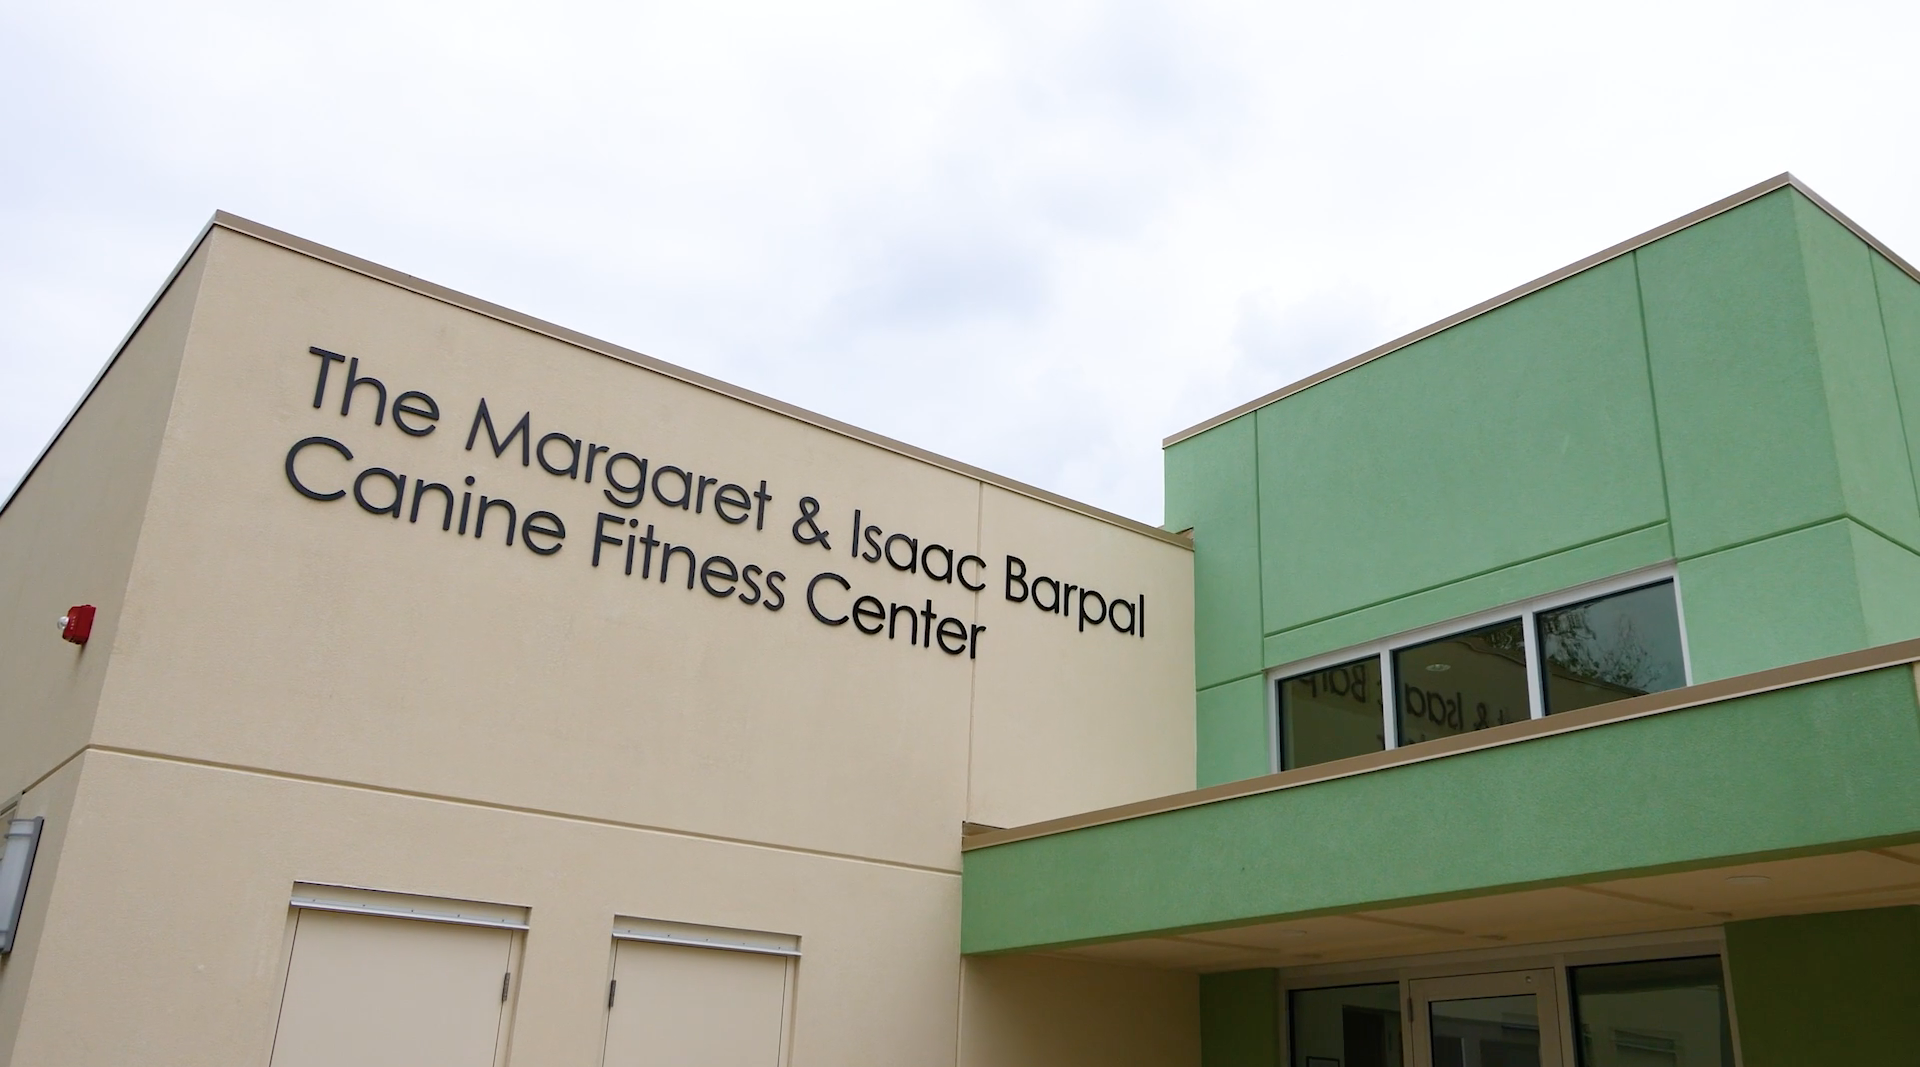 A photo of the grand opening of The Margaret & Isaac Barpal Canine Fitness Center on the Southeastern Guide Dogs Campus in Palmetto, Florida